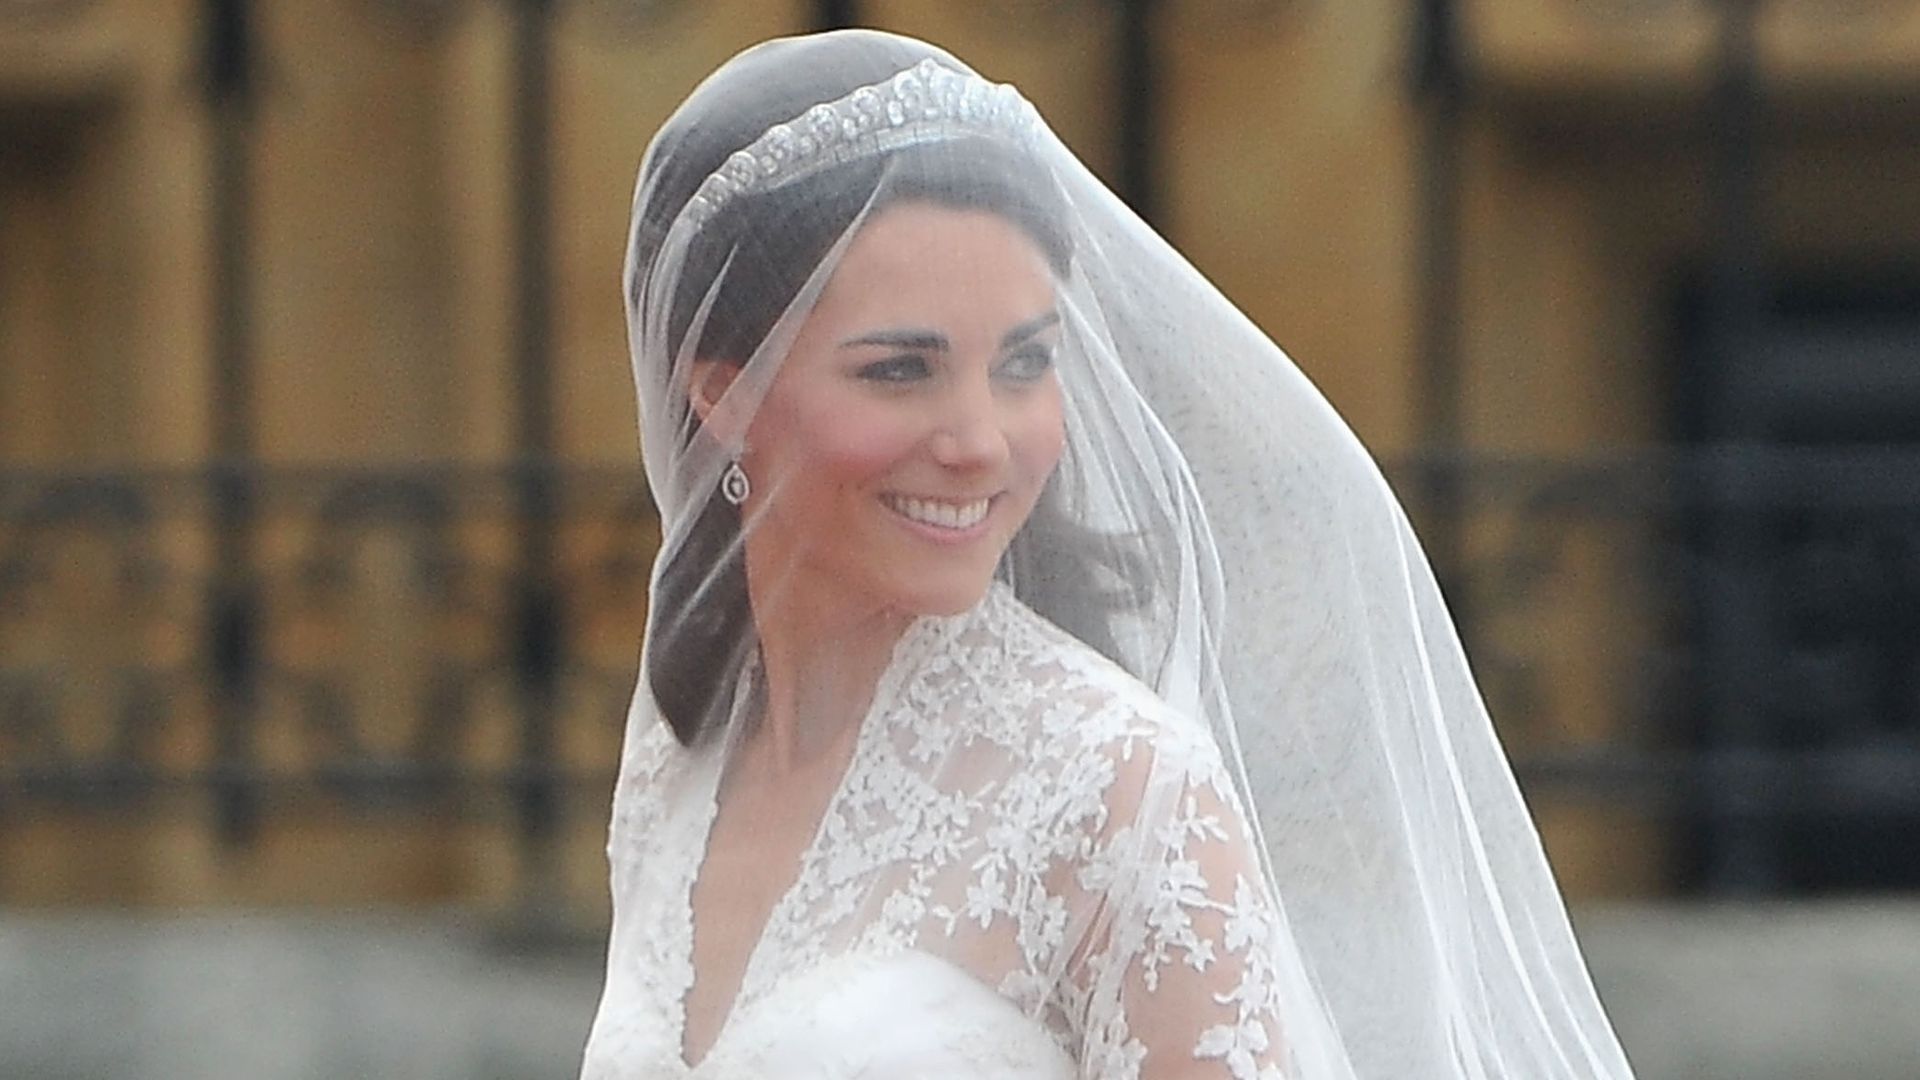 10 things you didn't know about Princess Kate's wedding dress